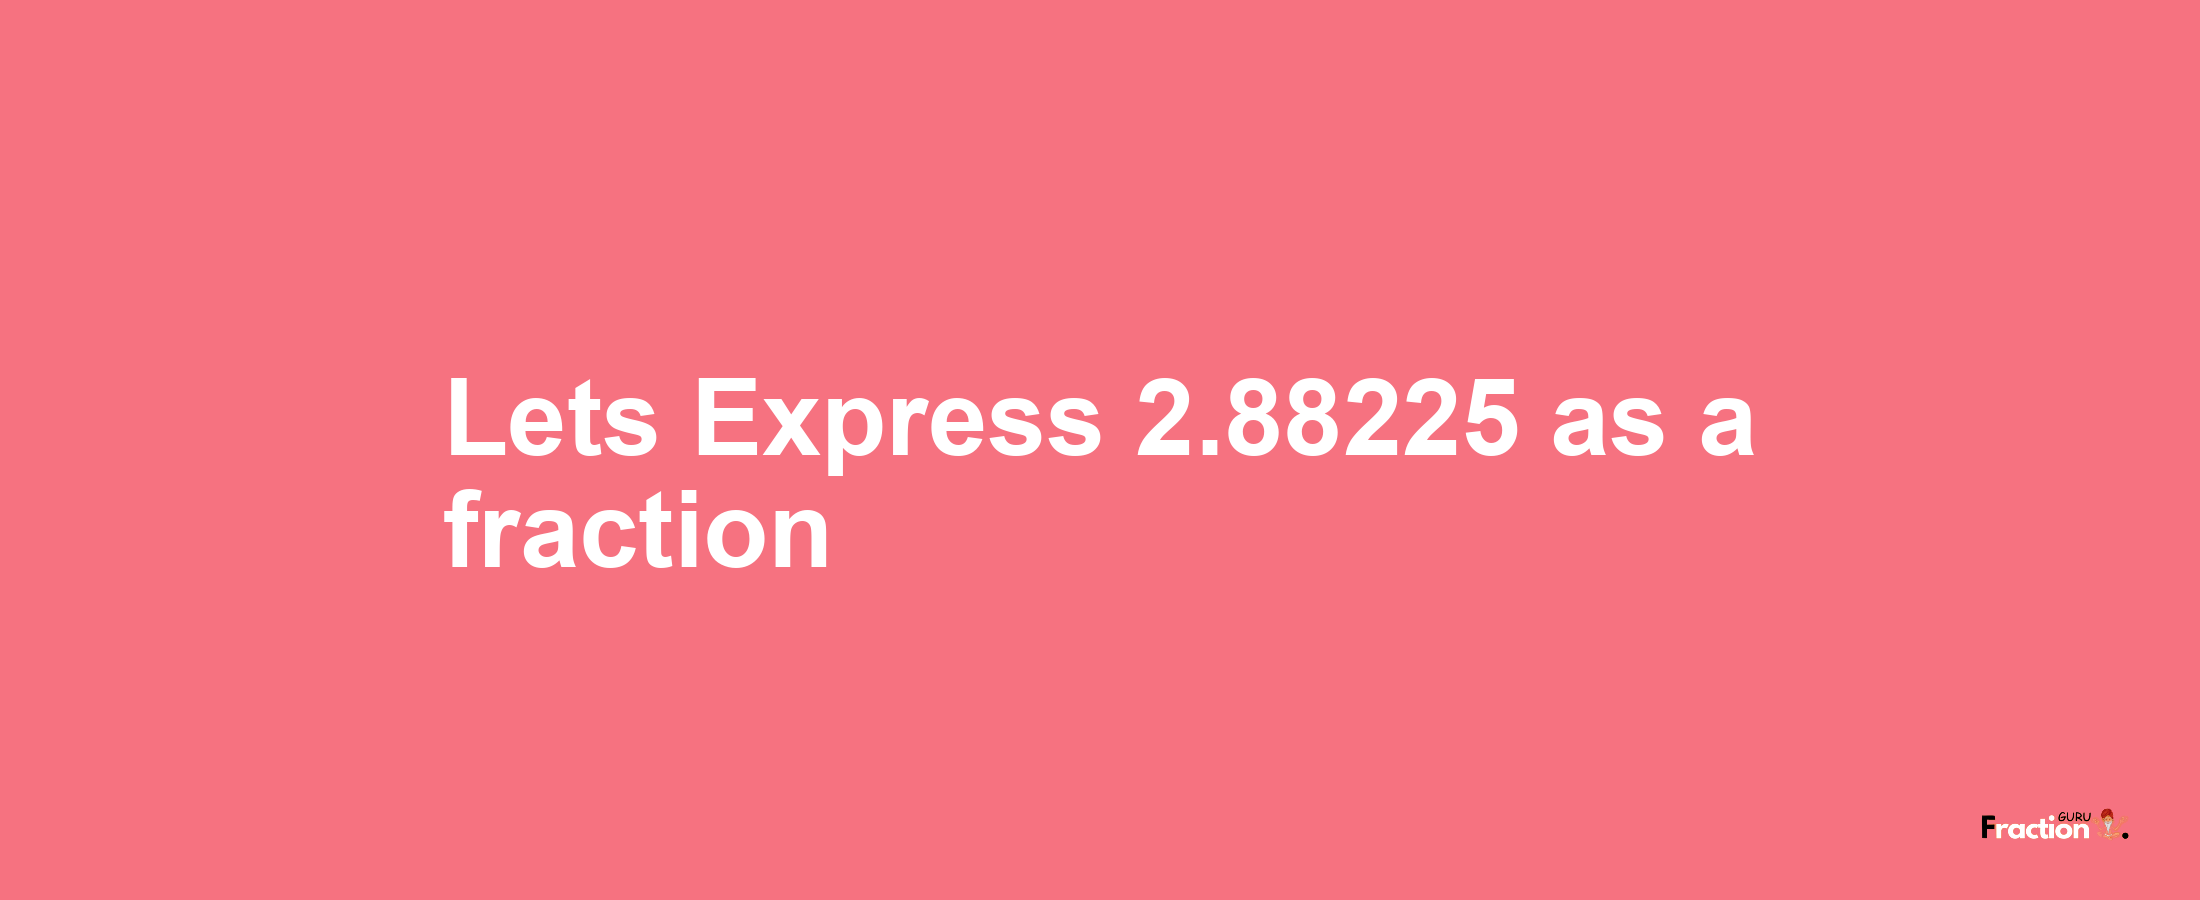 Lets Express 2.88225 as afraction